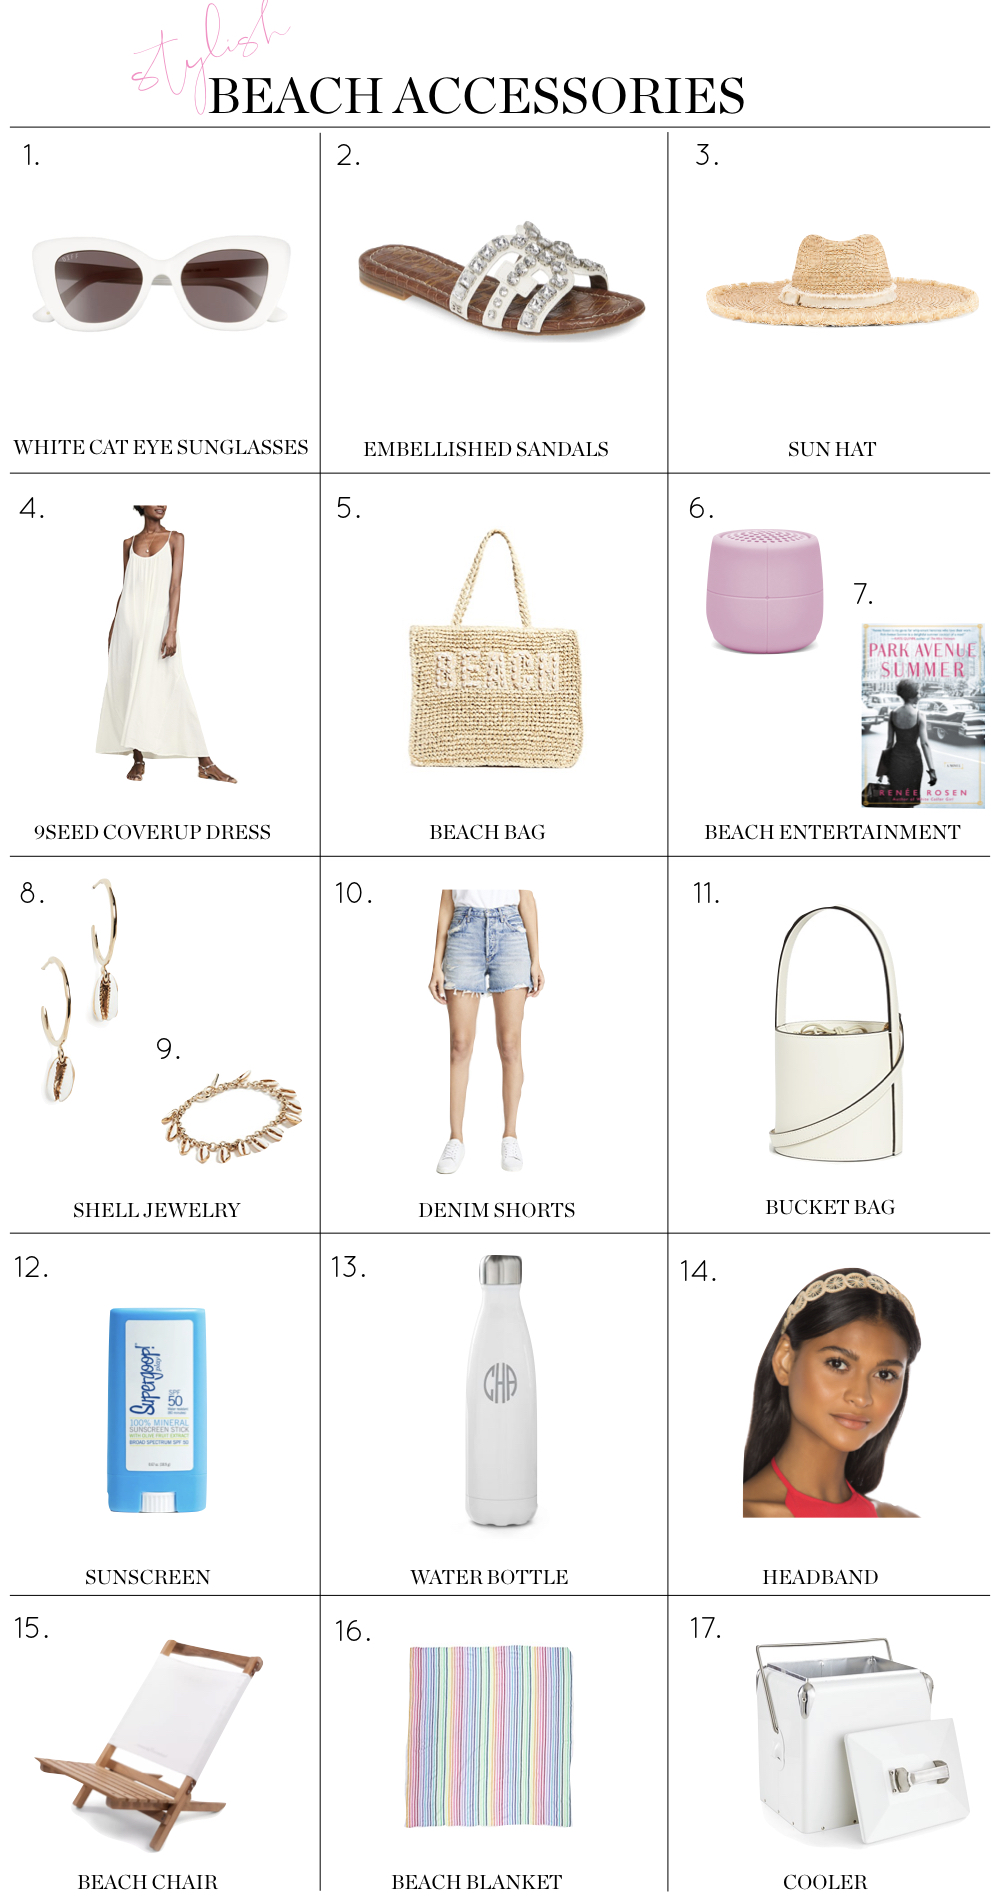 17 fun things to pack for the beach including stylish beach accessories